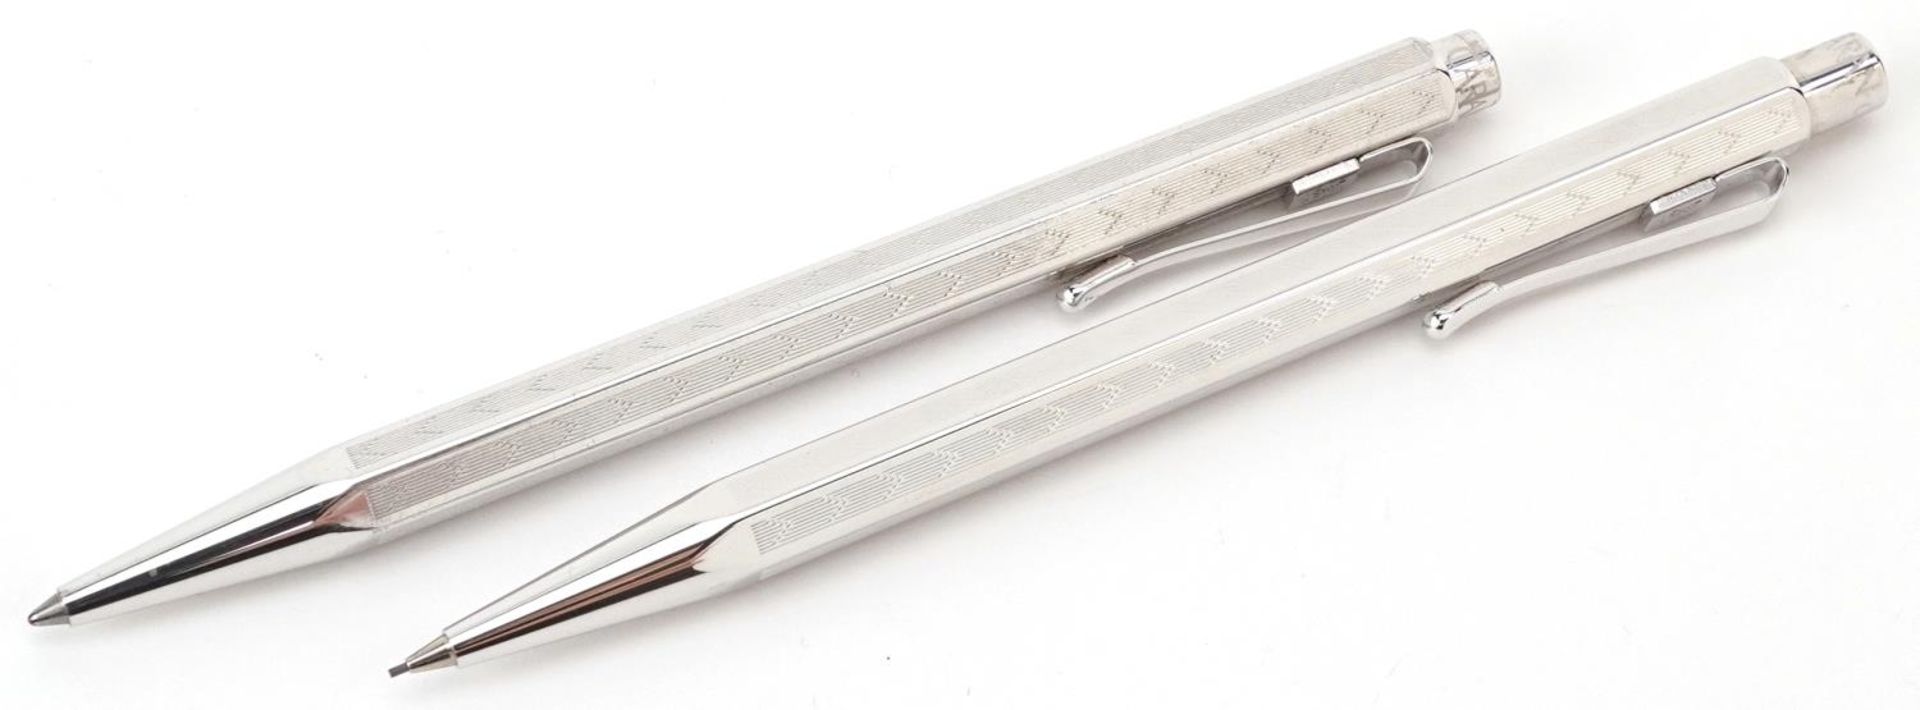 Carin D'Ache, Swiss engine turned propelling pencil and ballpoint pen with fitted case - Image 2 of 5